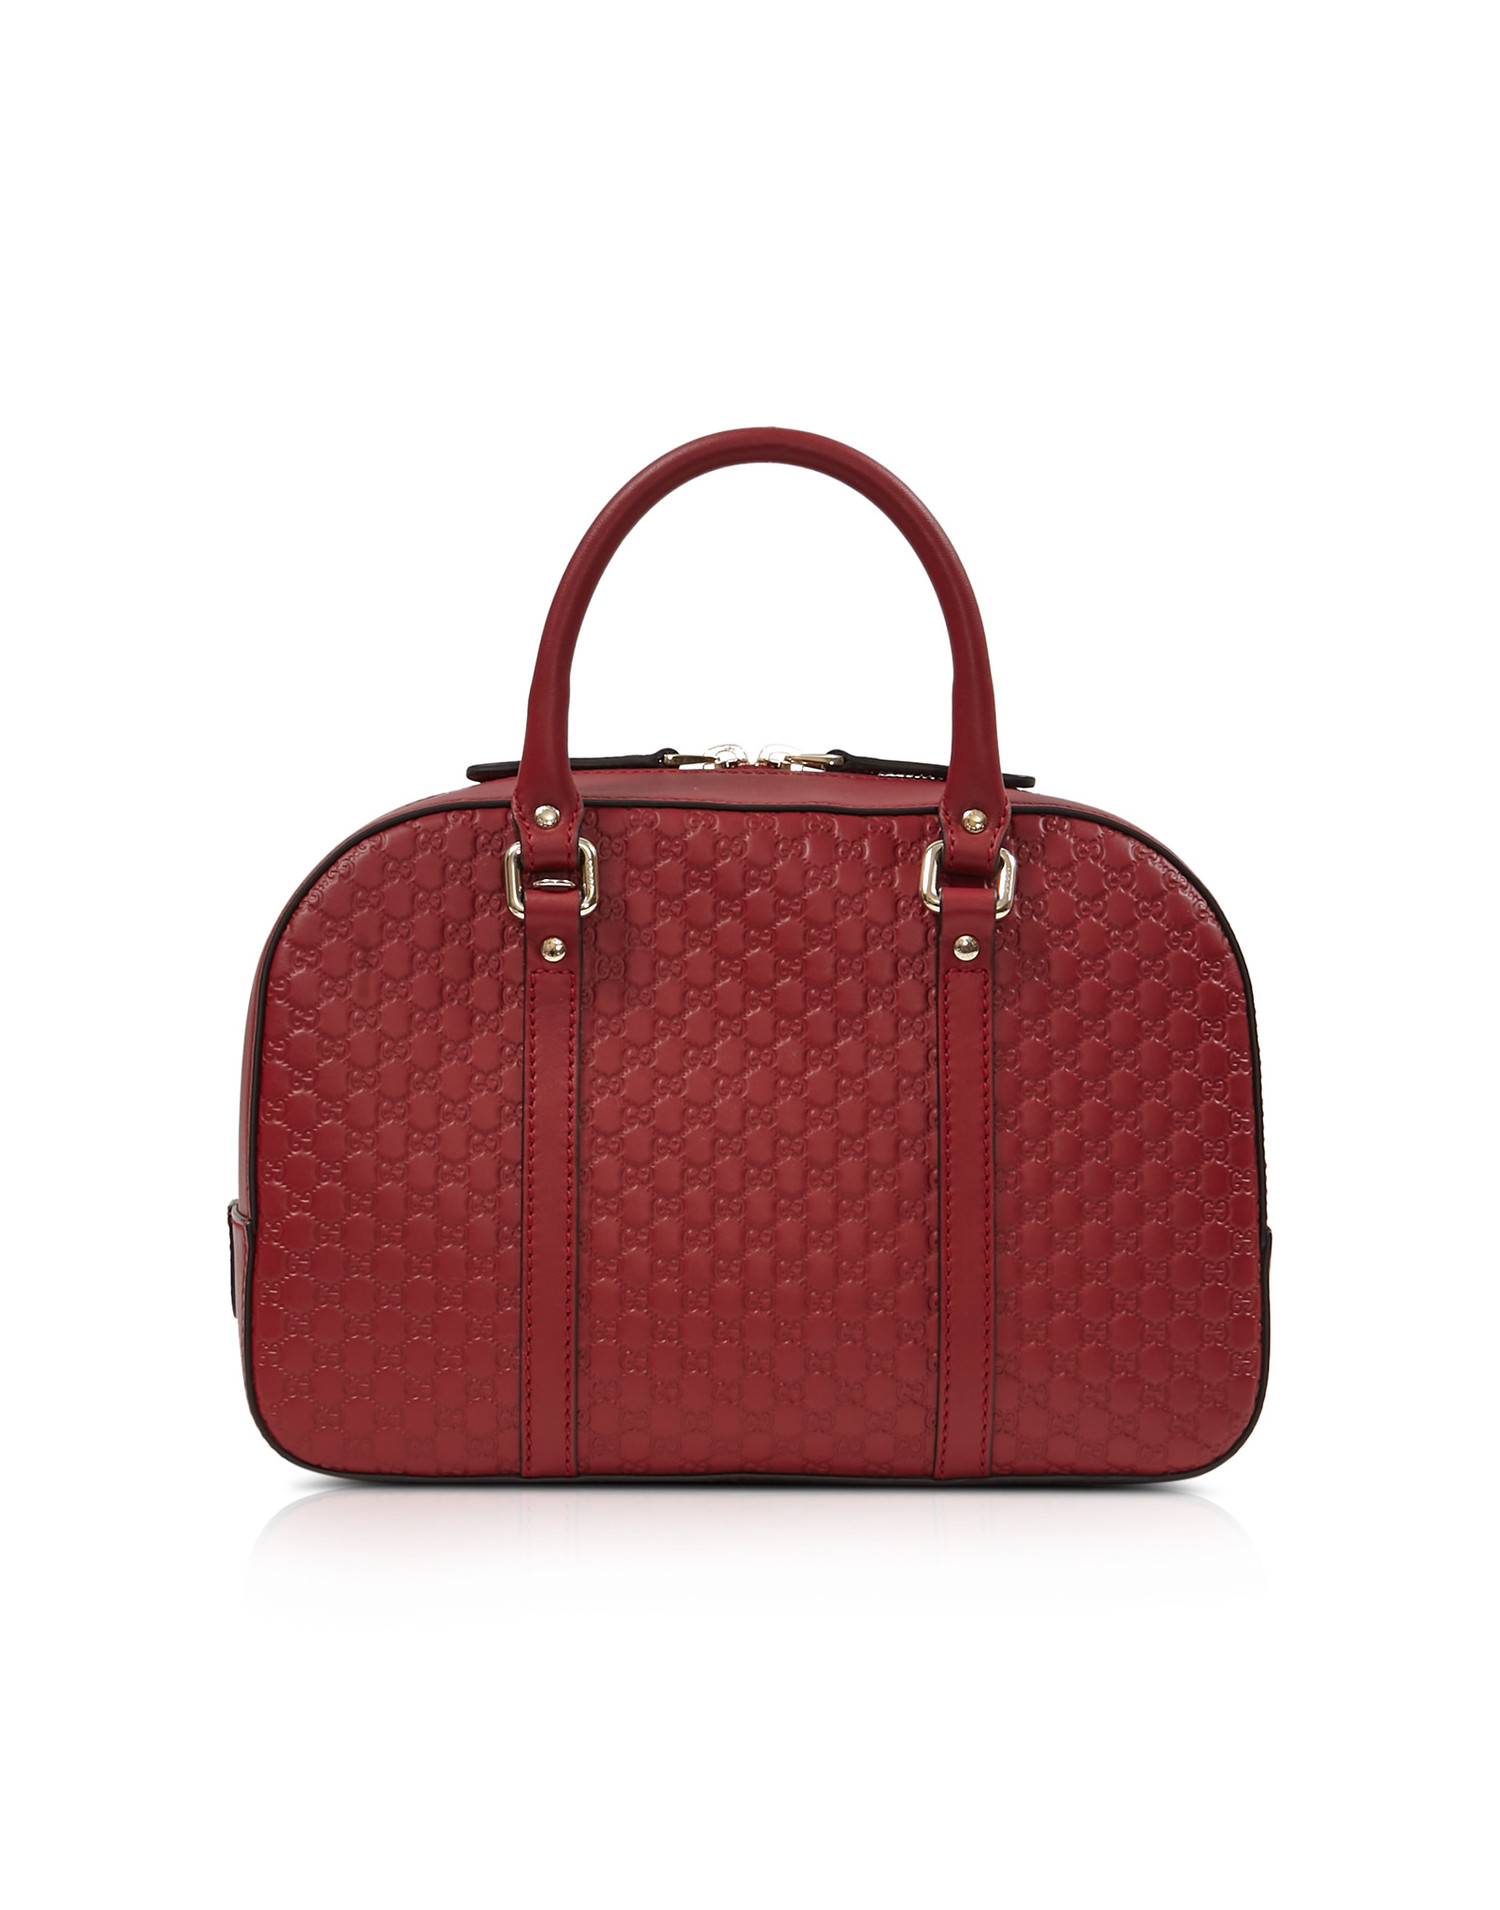 gucci red satchel